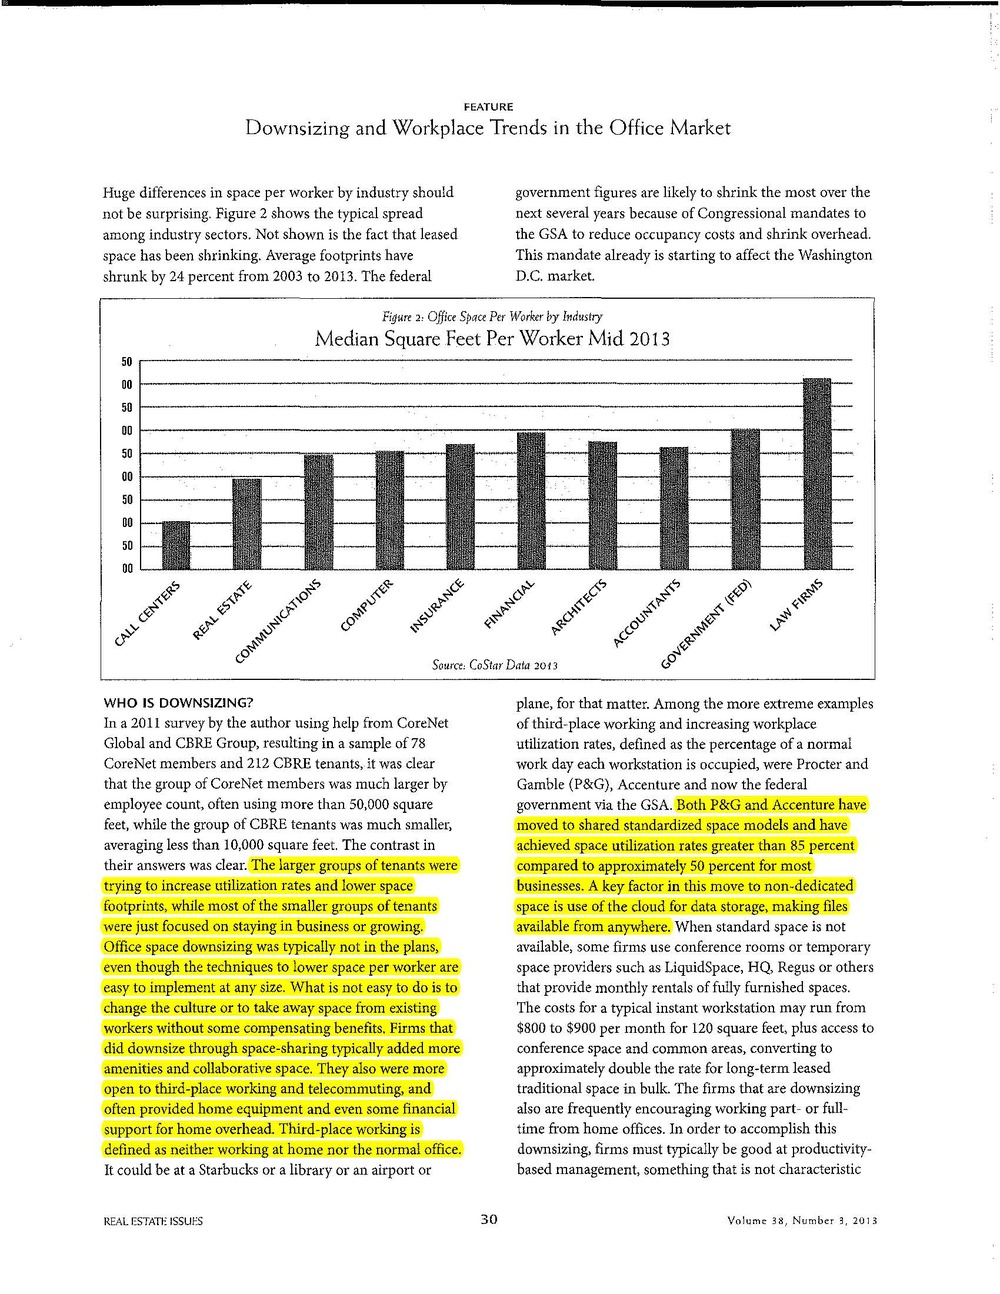 Downsizing and Workplace Trends in the Office Market_Page_3